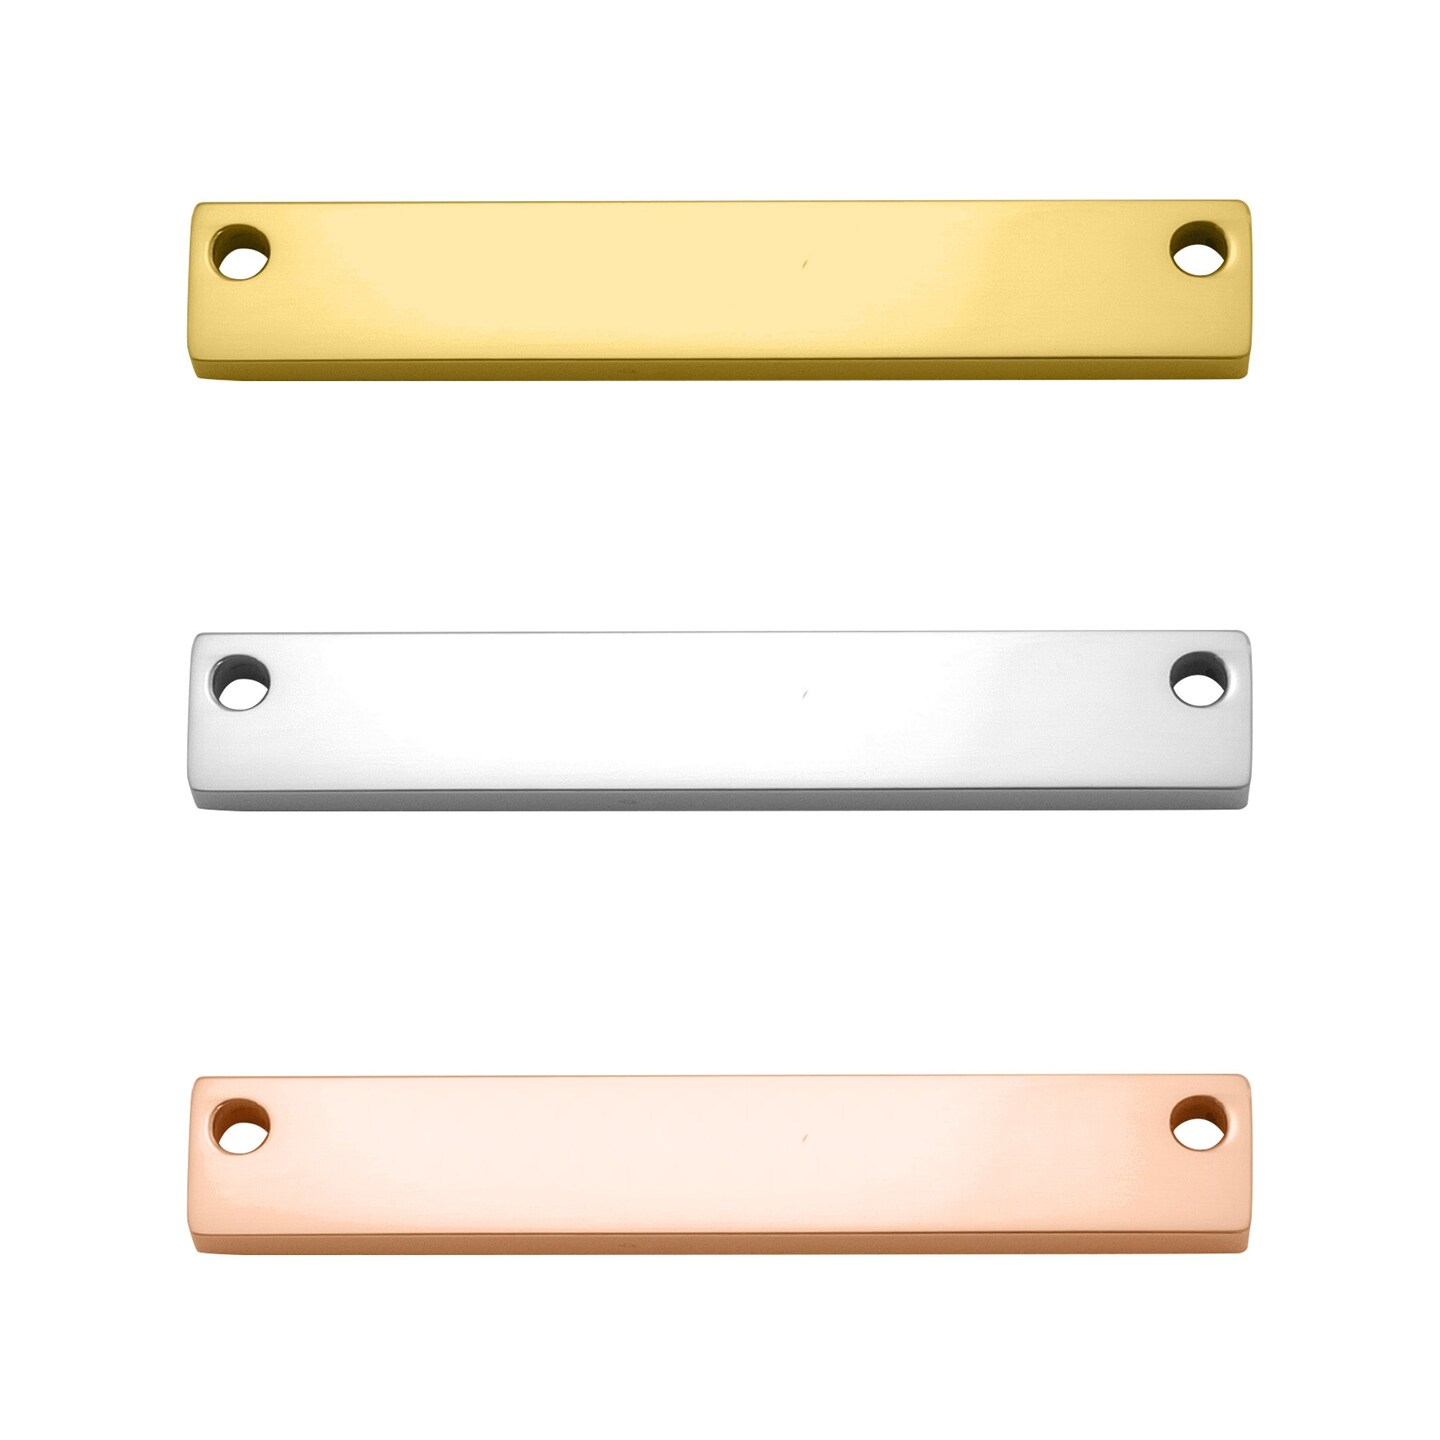 10 Pack - 18K Gold PVD Coated Polished Stainless Steel Blank Bar